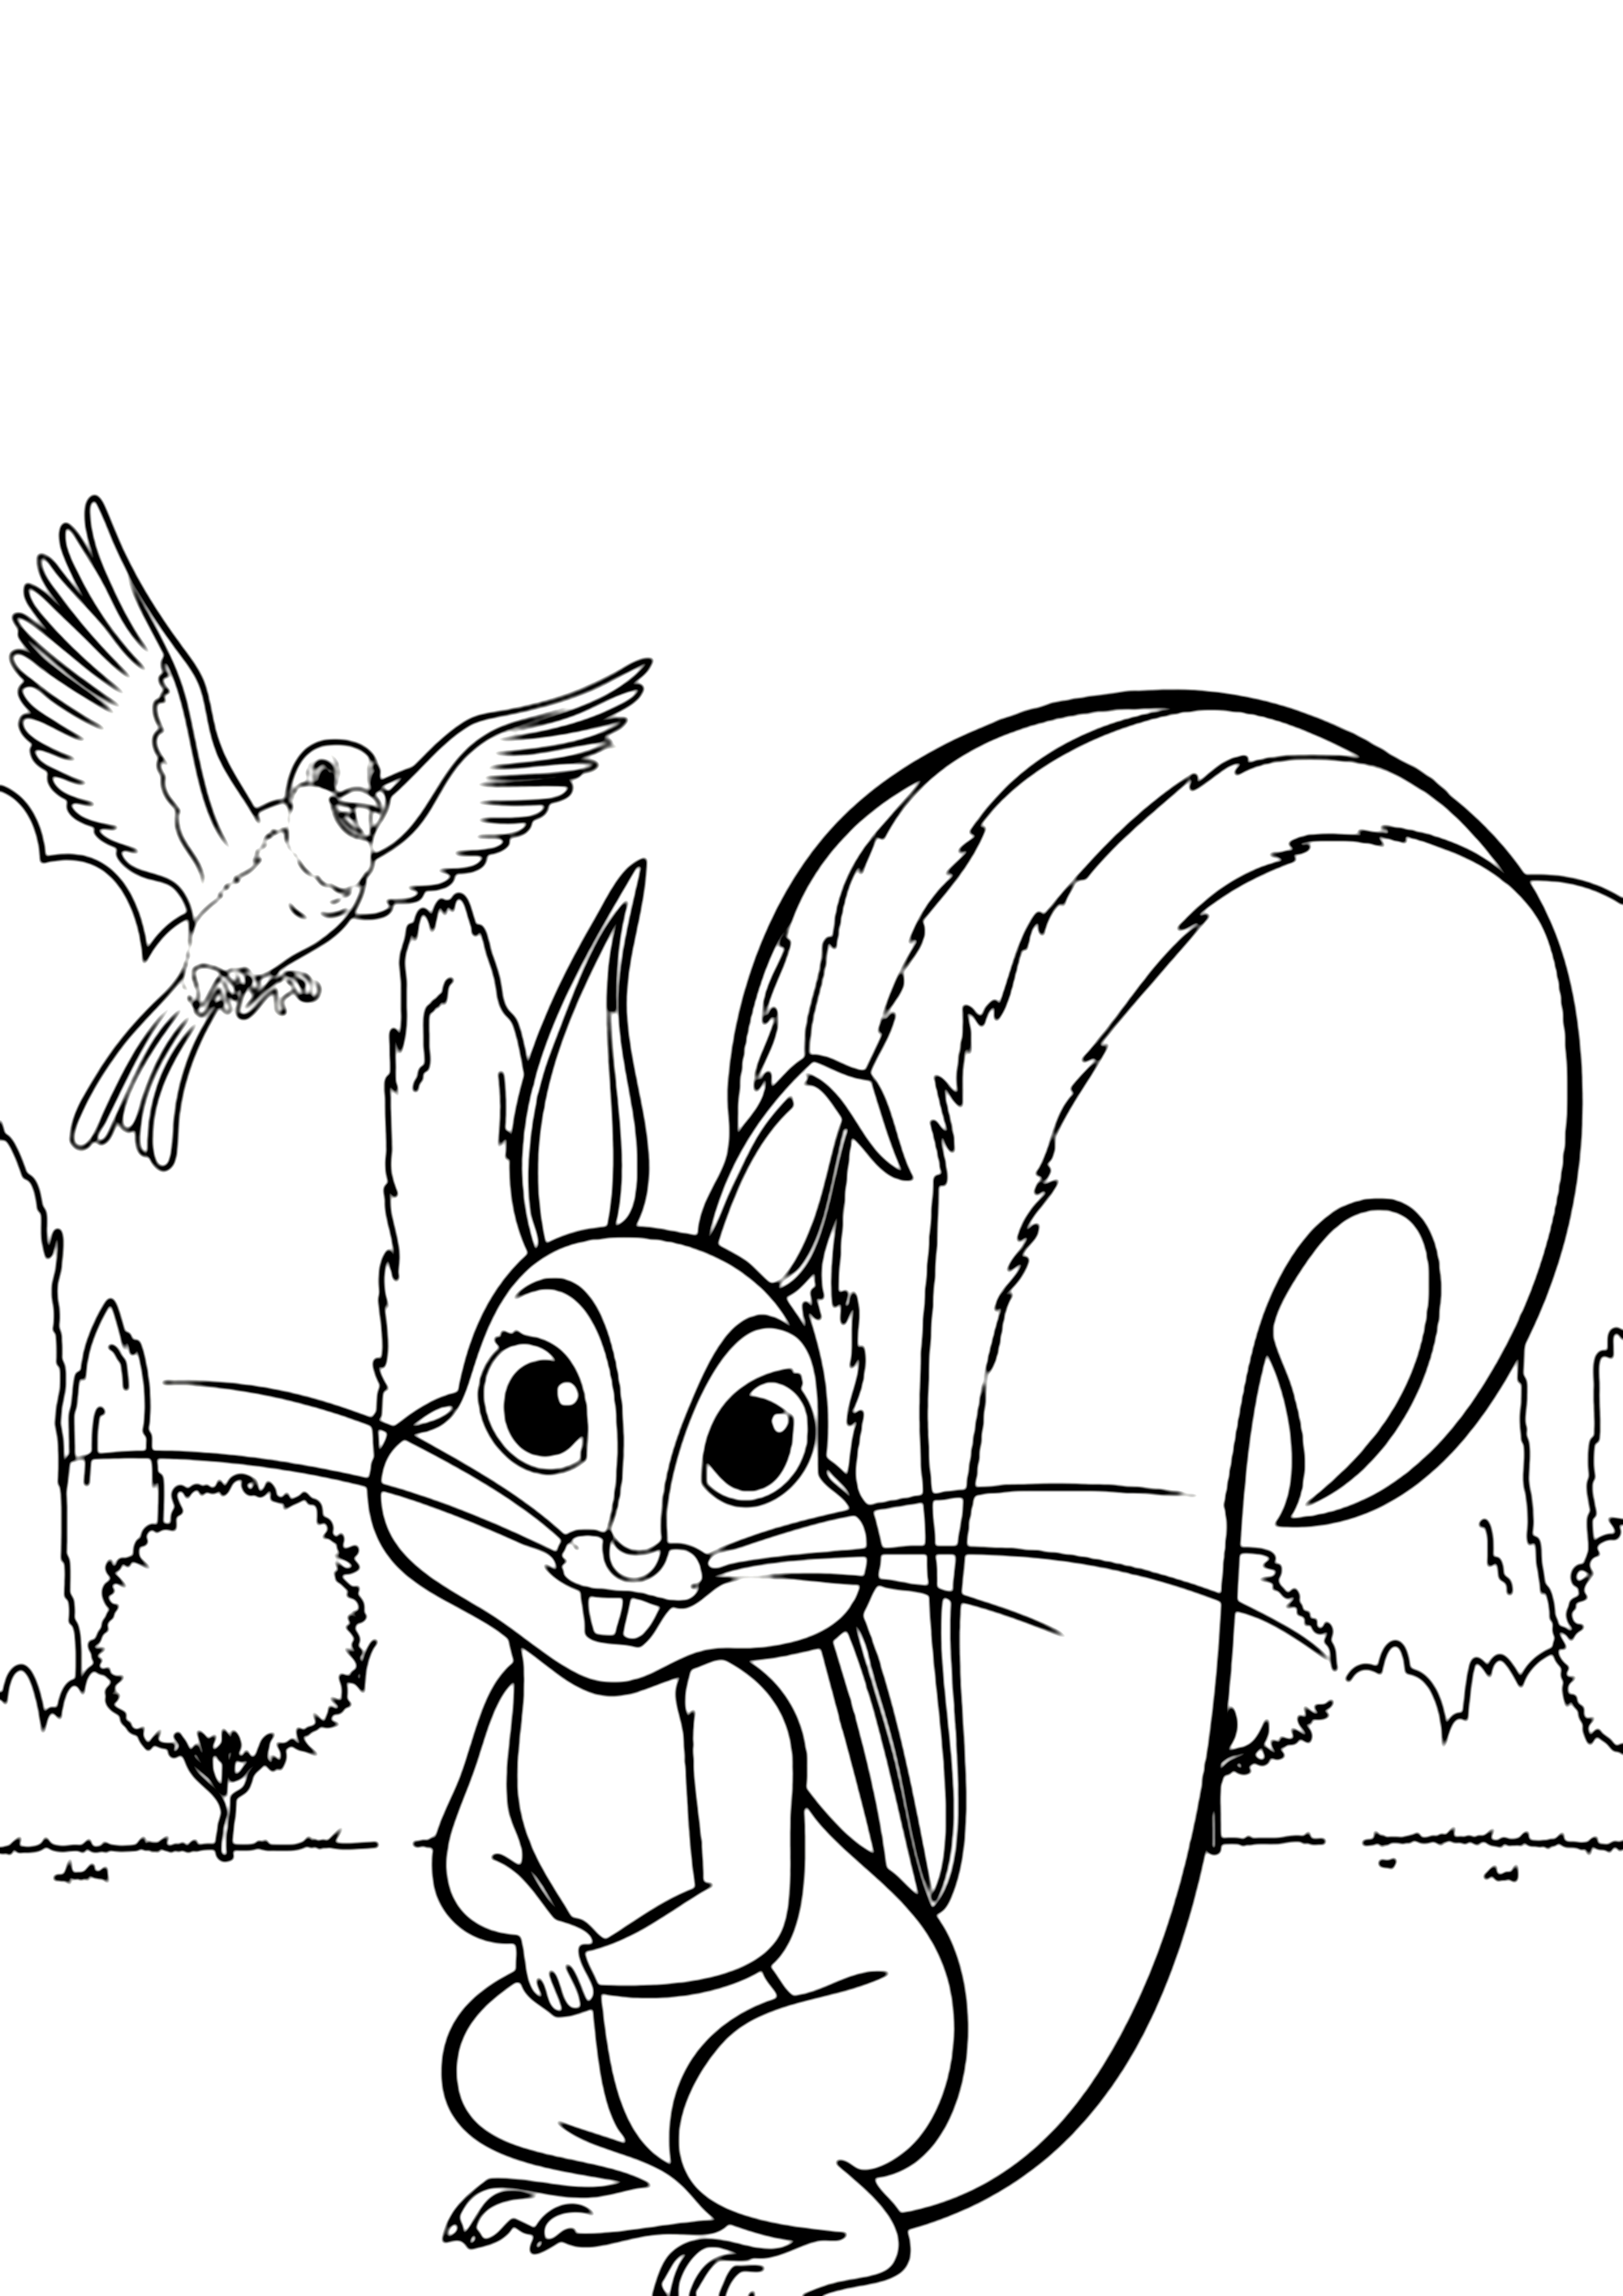 Cute Princess Sofias Friendly Squirrel and Robin Bird Coloring Page